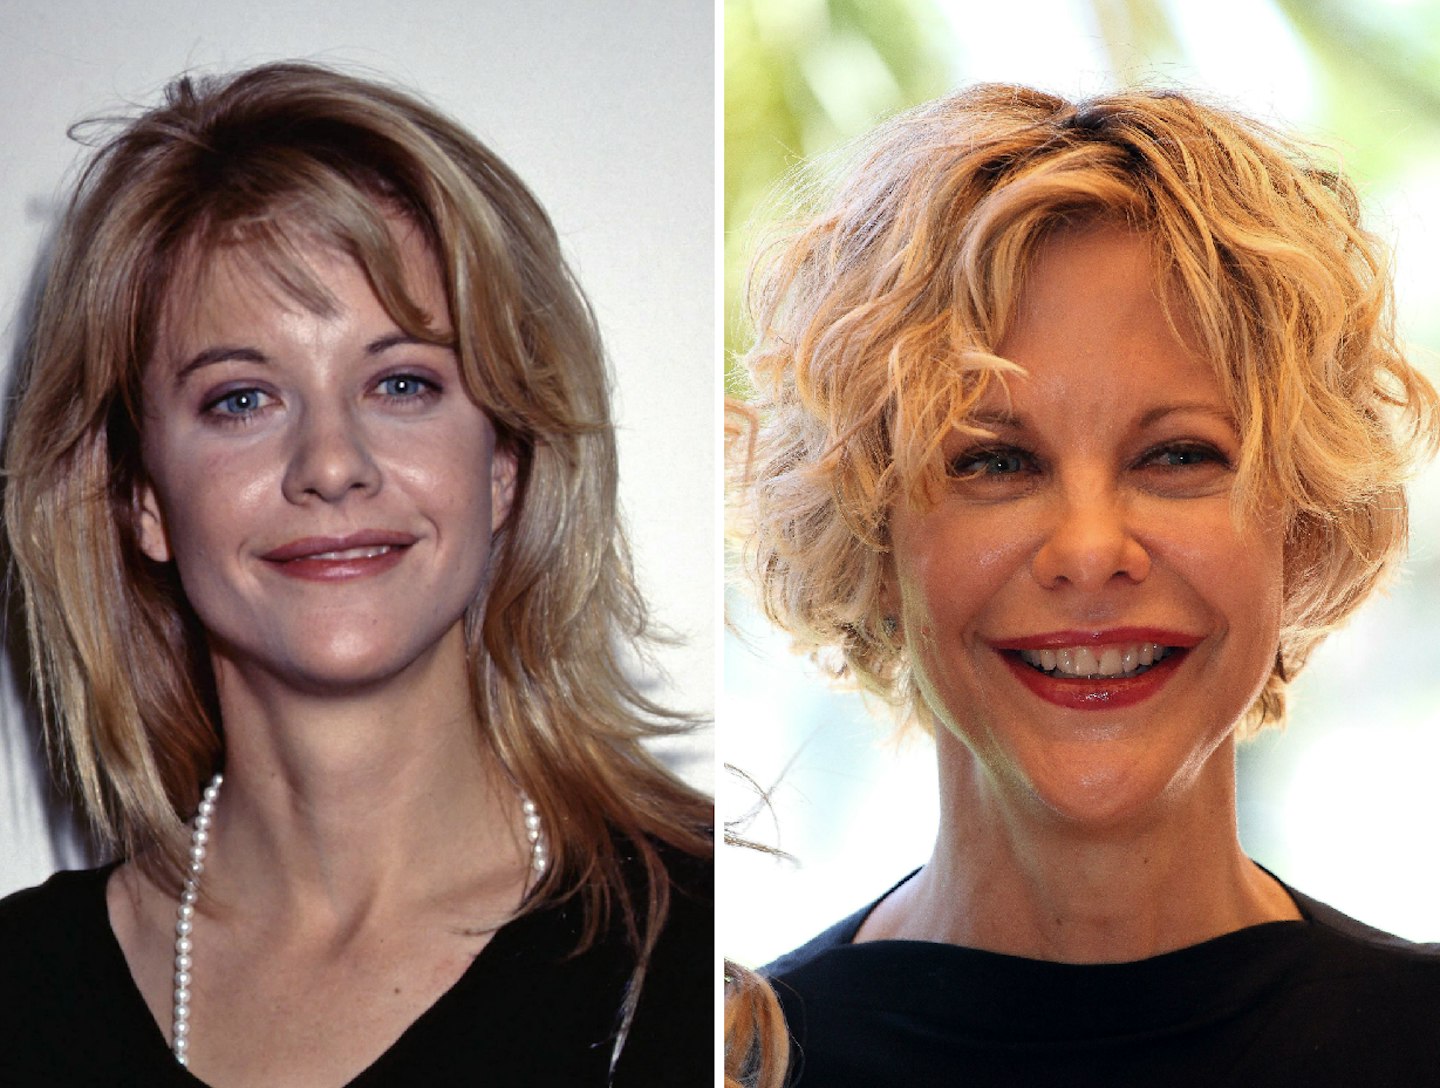 Meg Ryan before and after plastic surgery